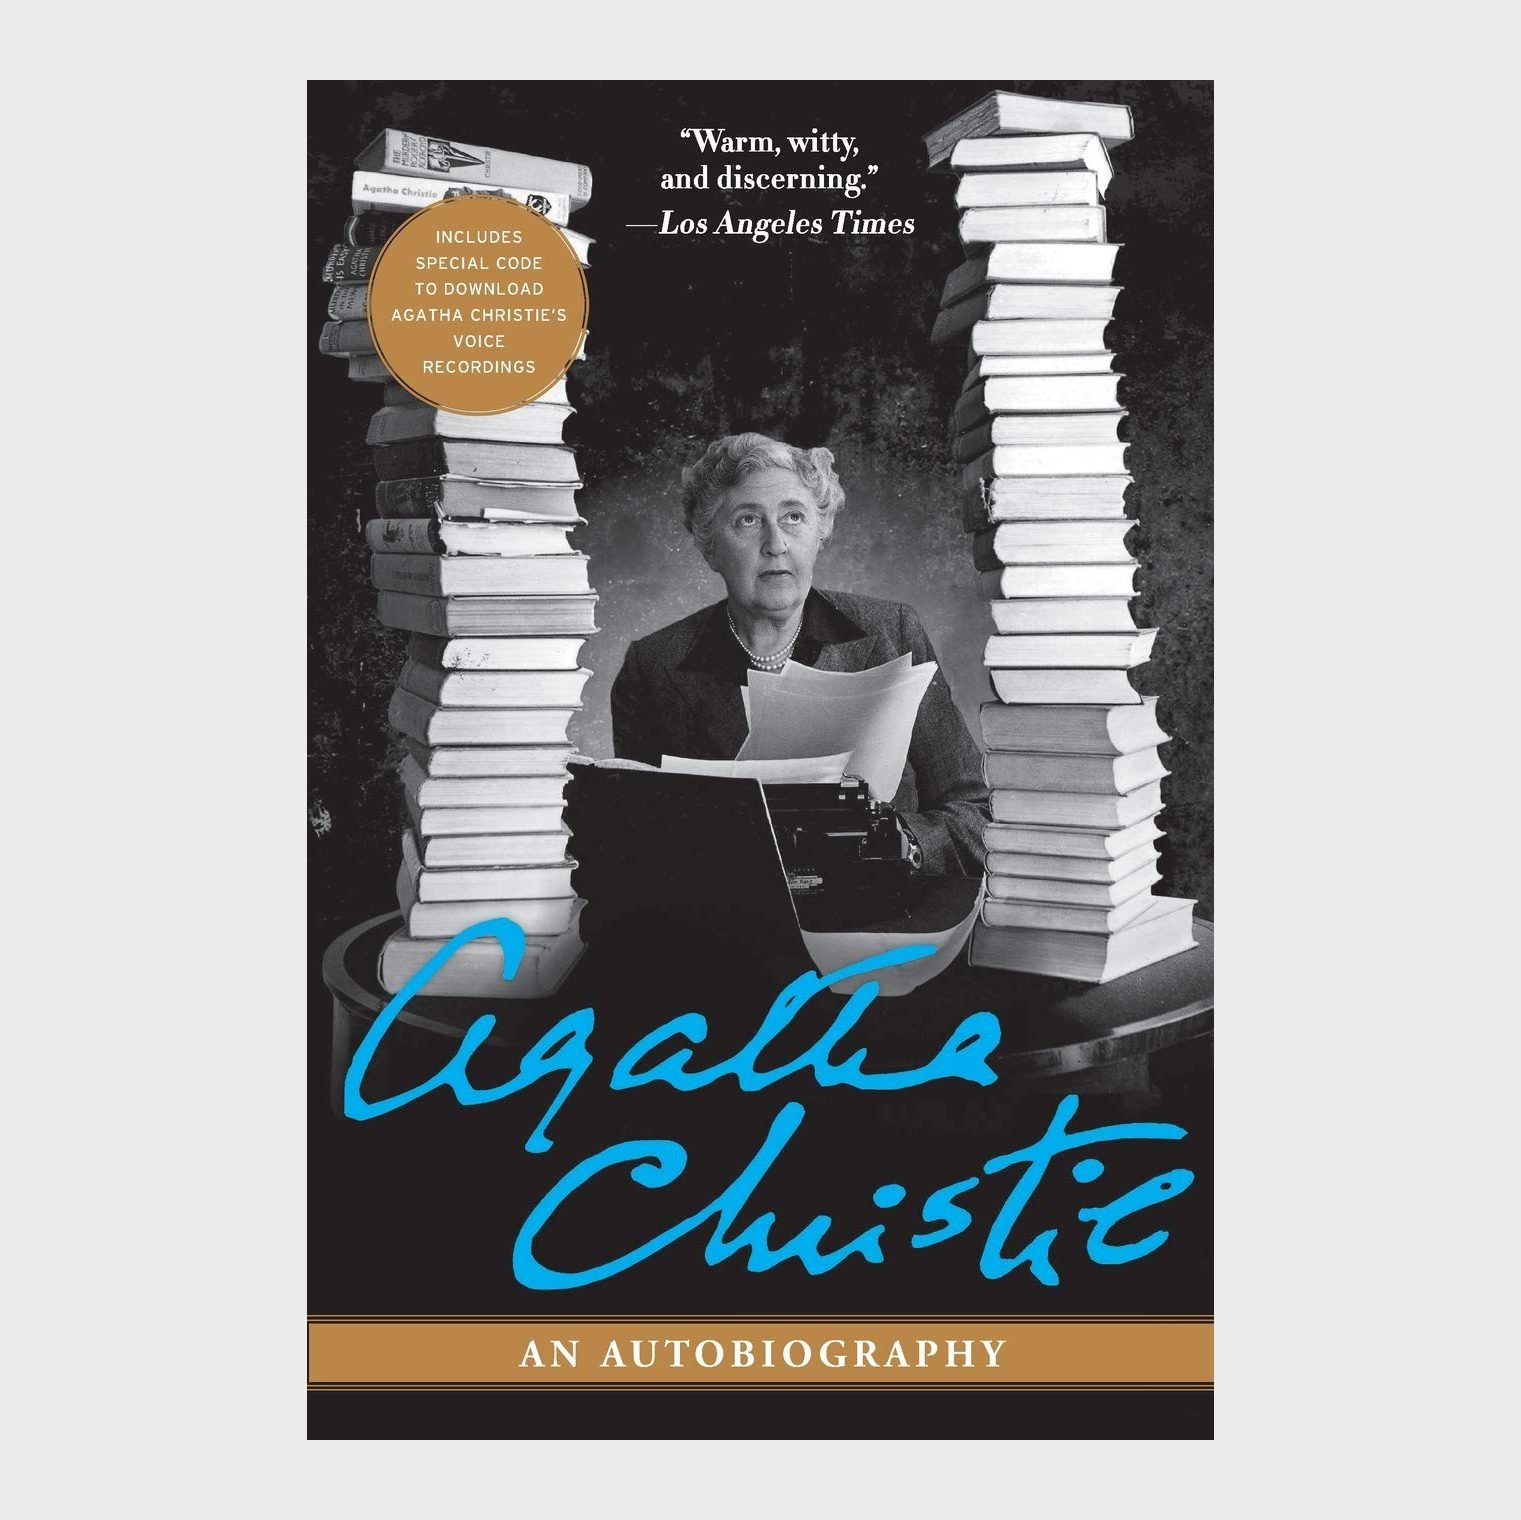 An Autobiography by Agatha Christie